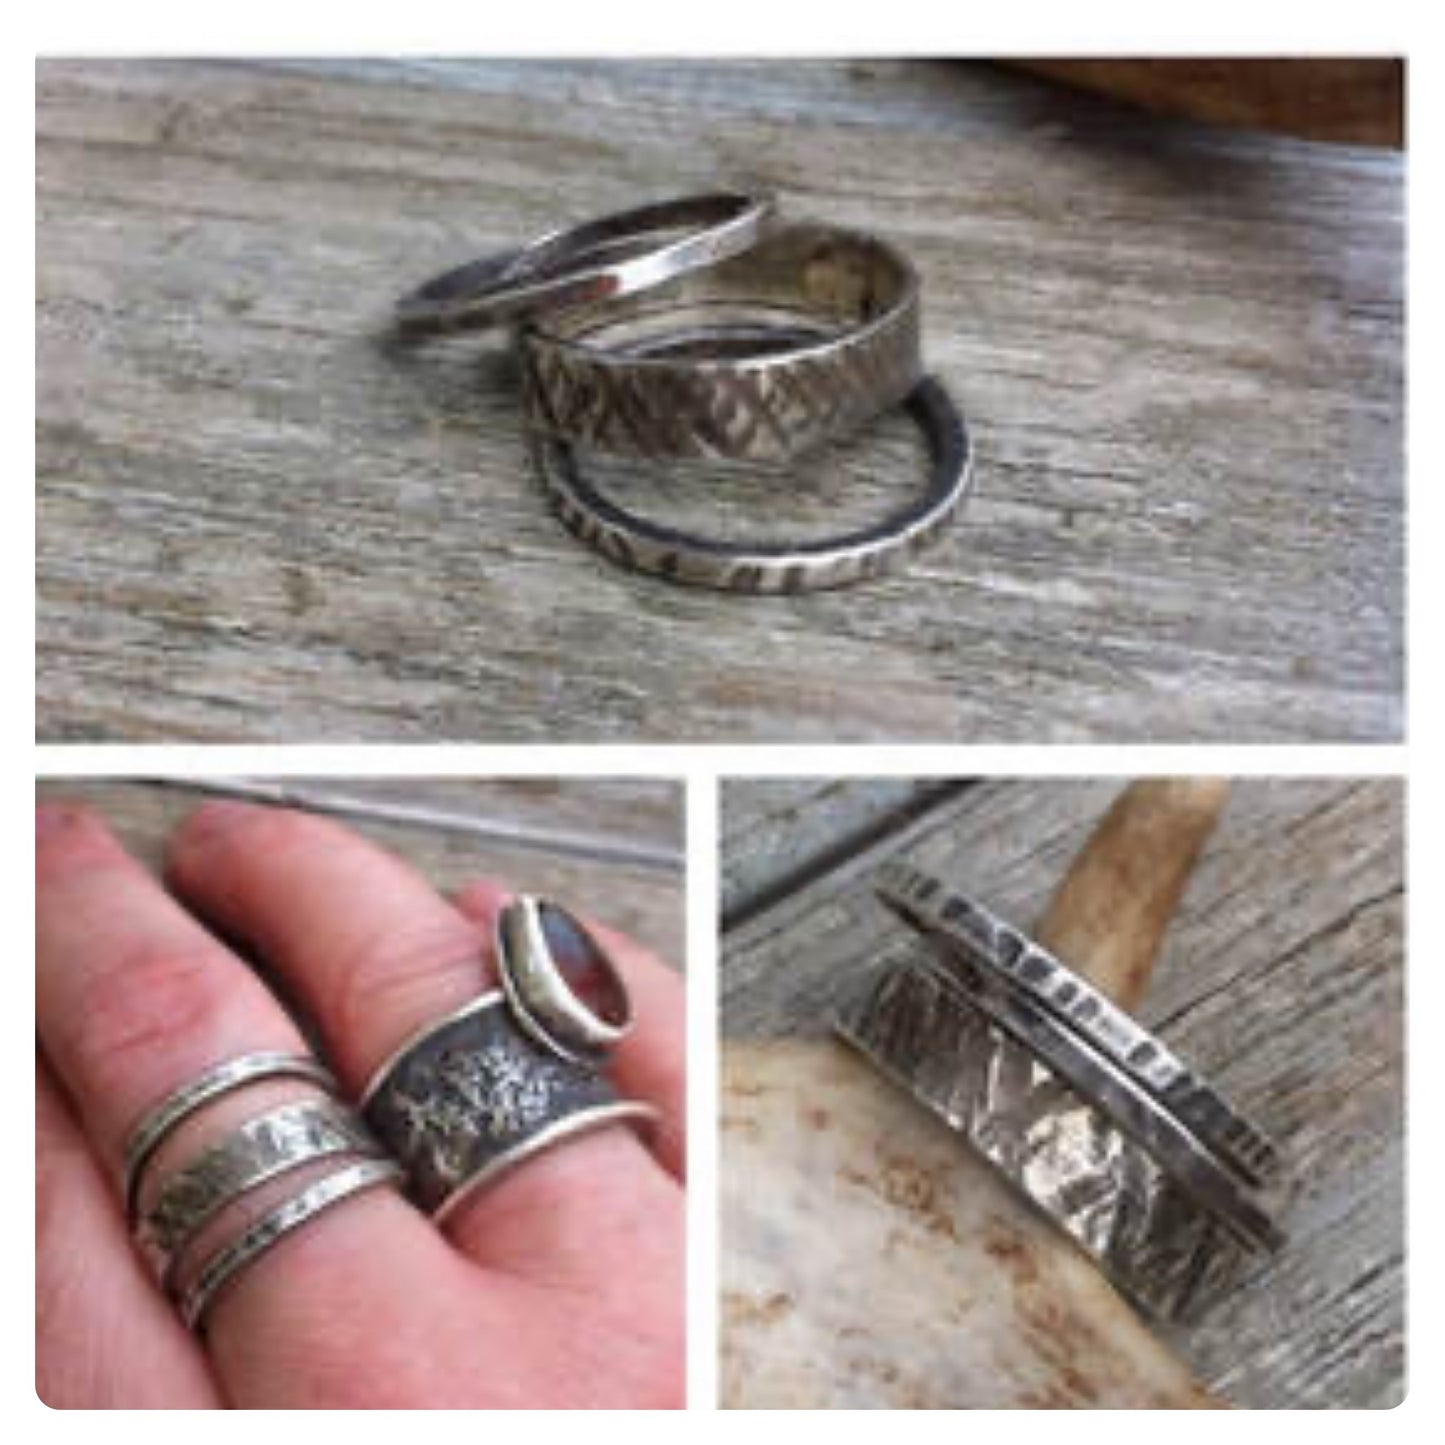 Parent/Teen Silver Stacker Rings Class April 13th 12-2